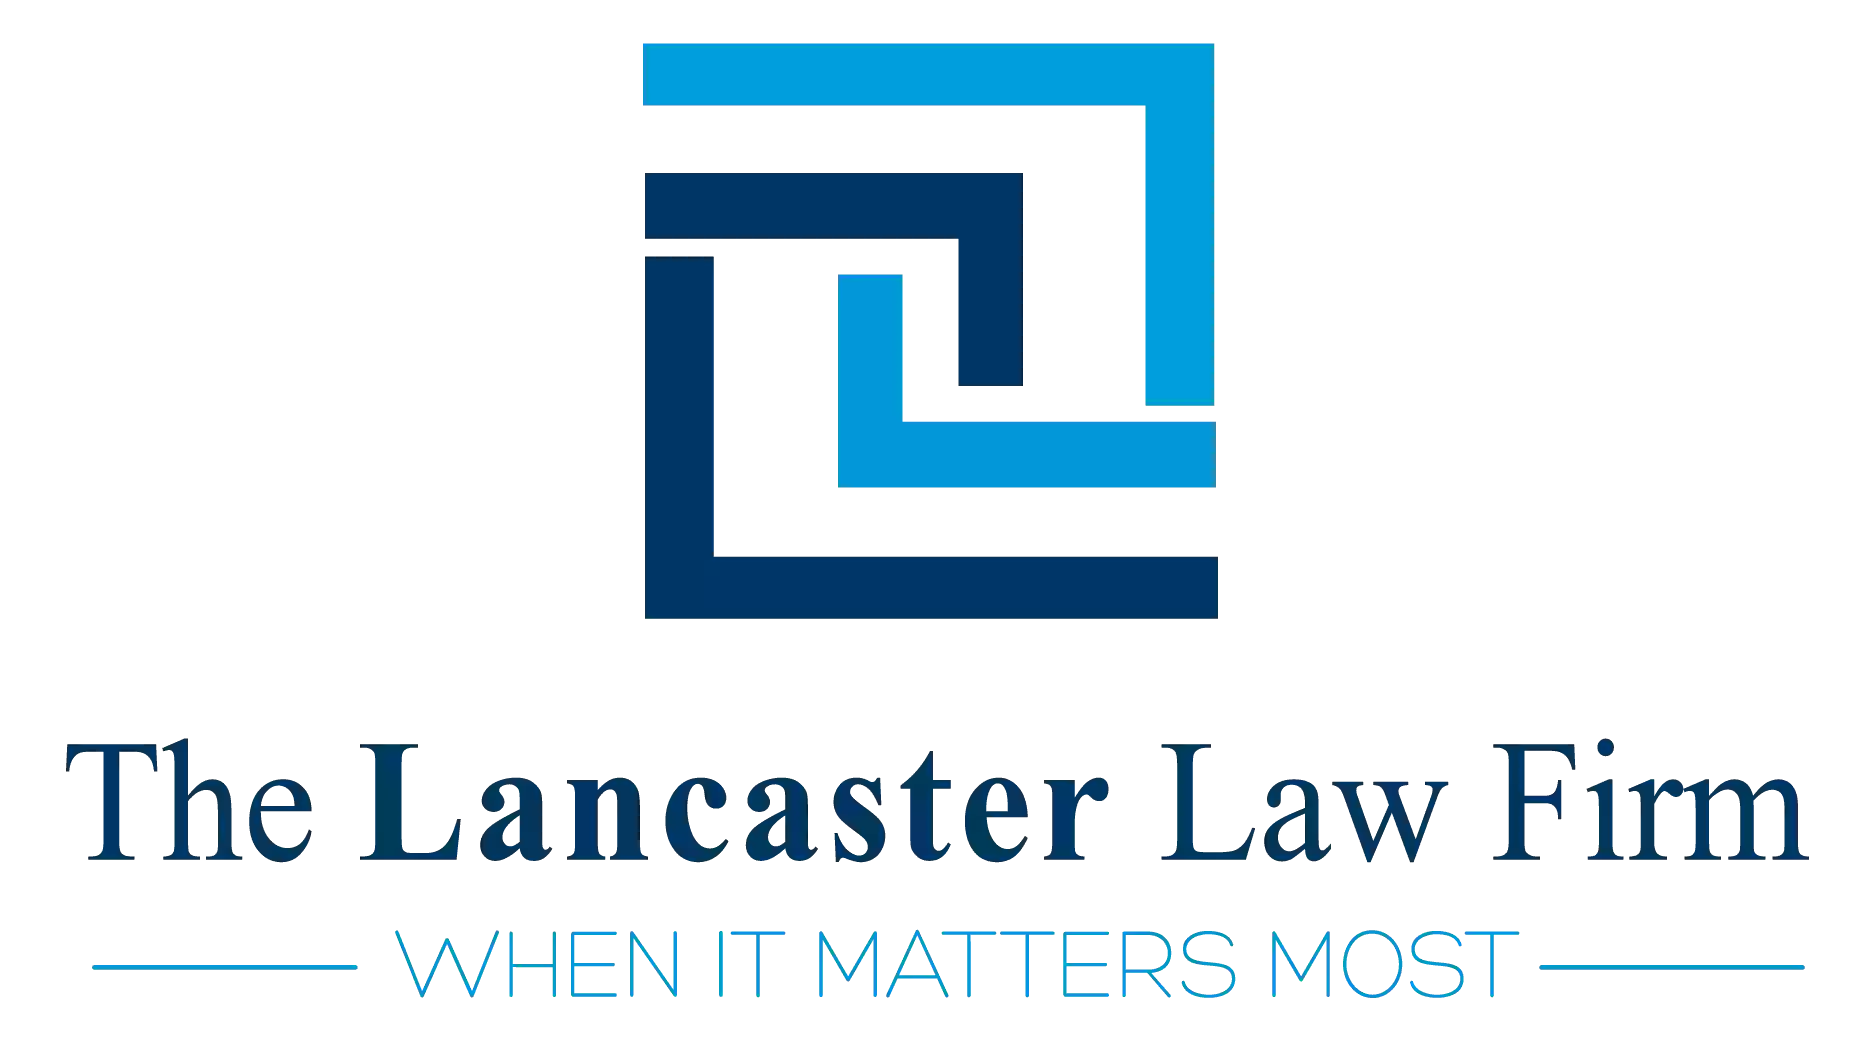 The Lancaster Law Firm, PLLC